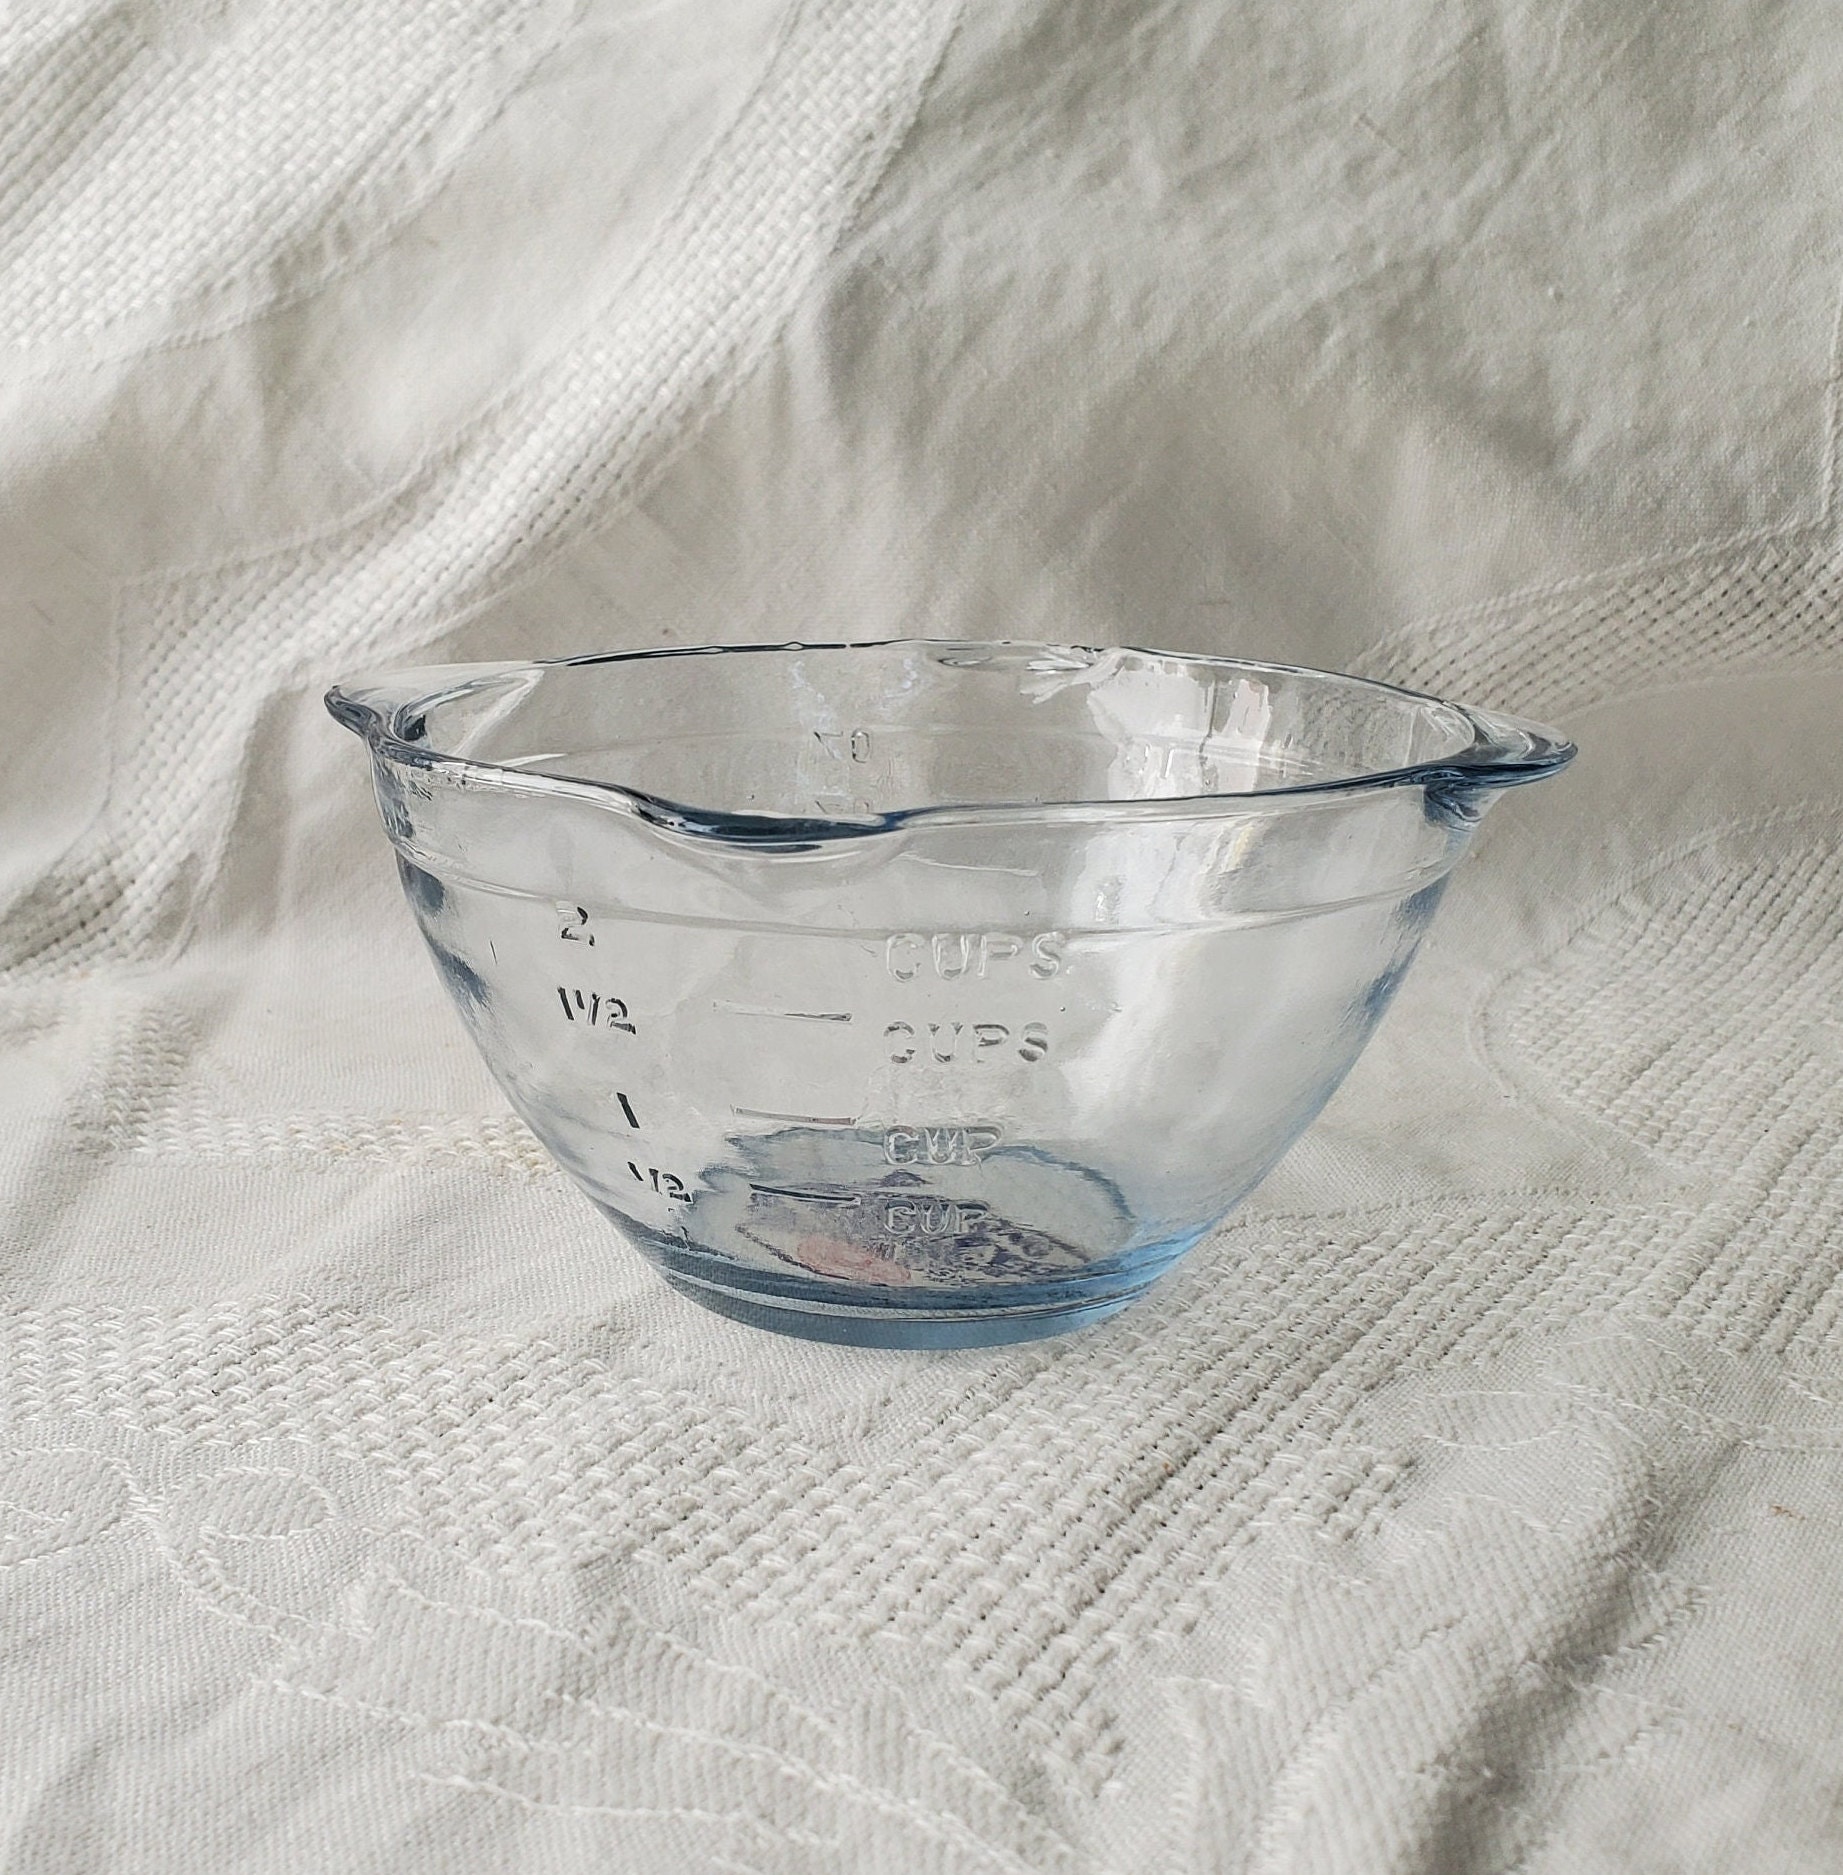 Confusing Measuring Cup with Reamer in Blue Glass